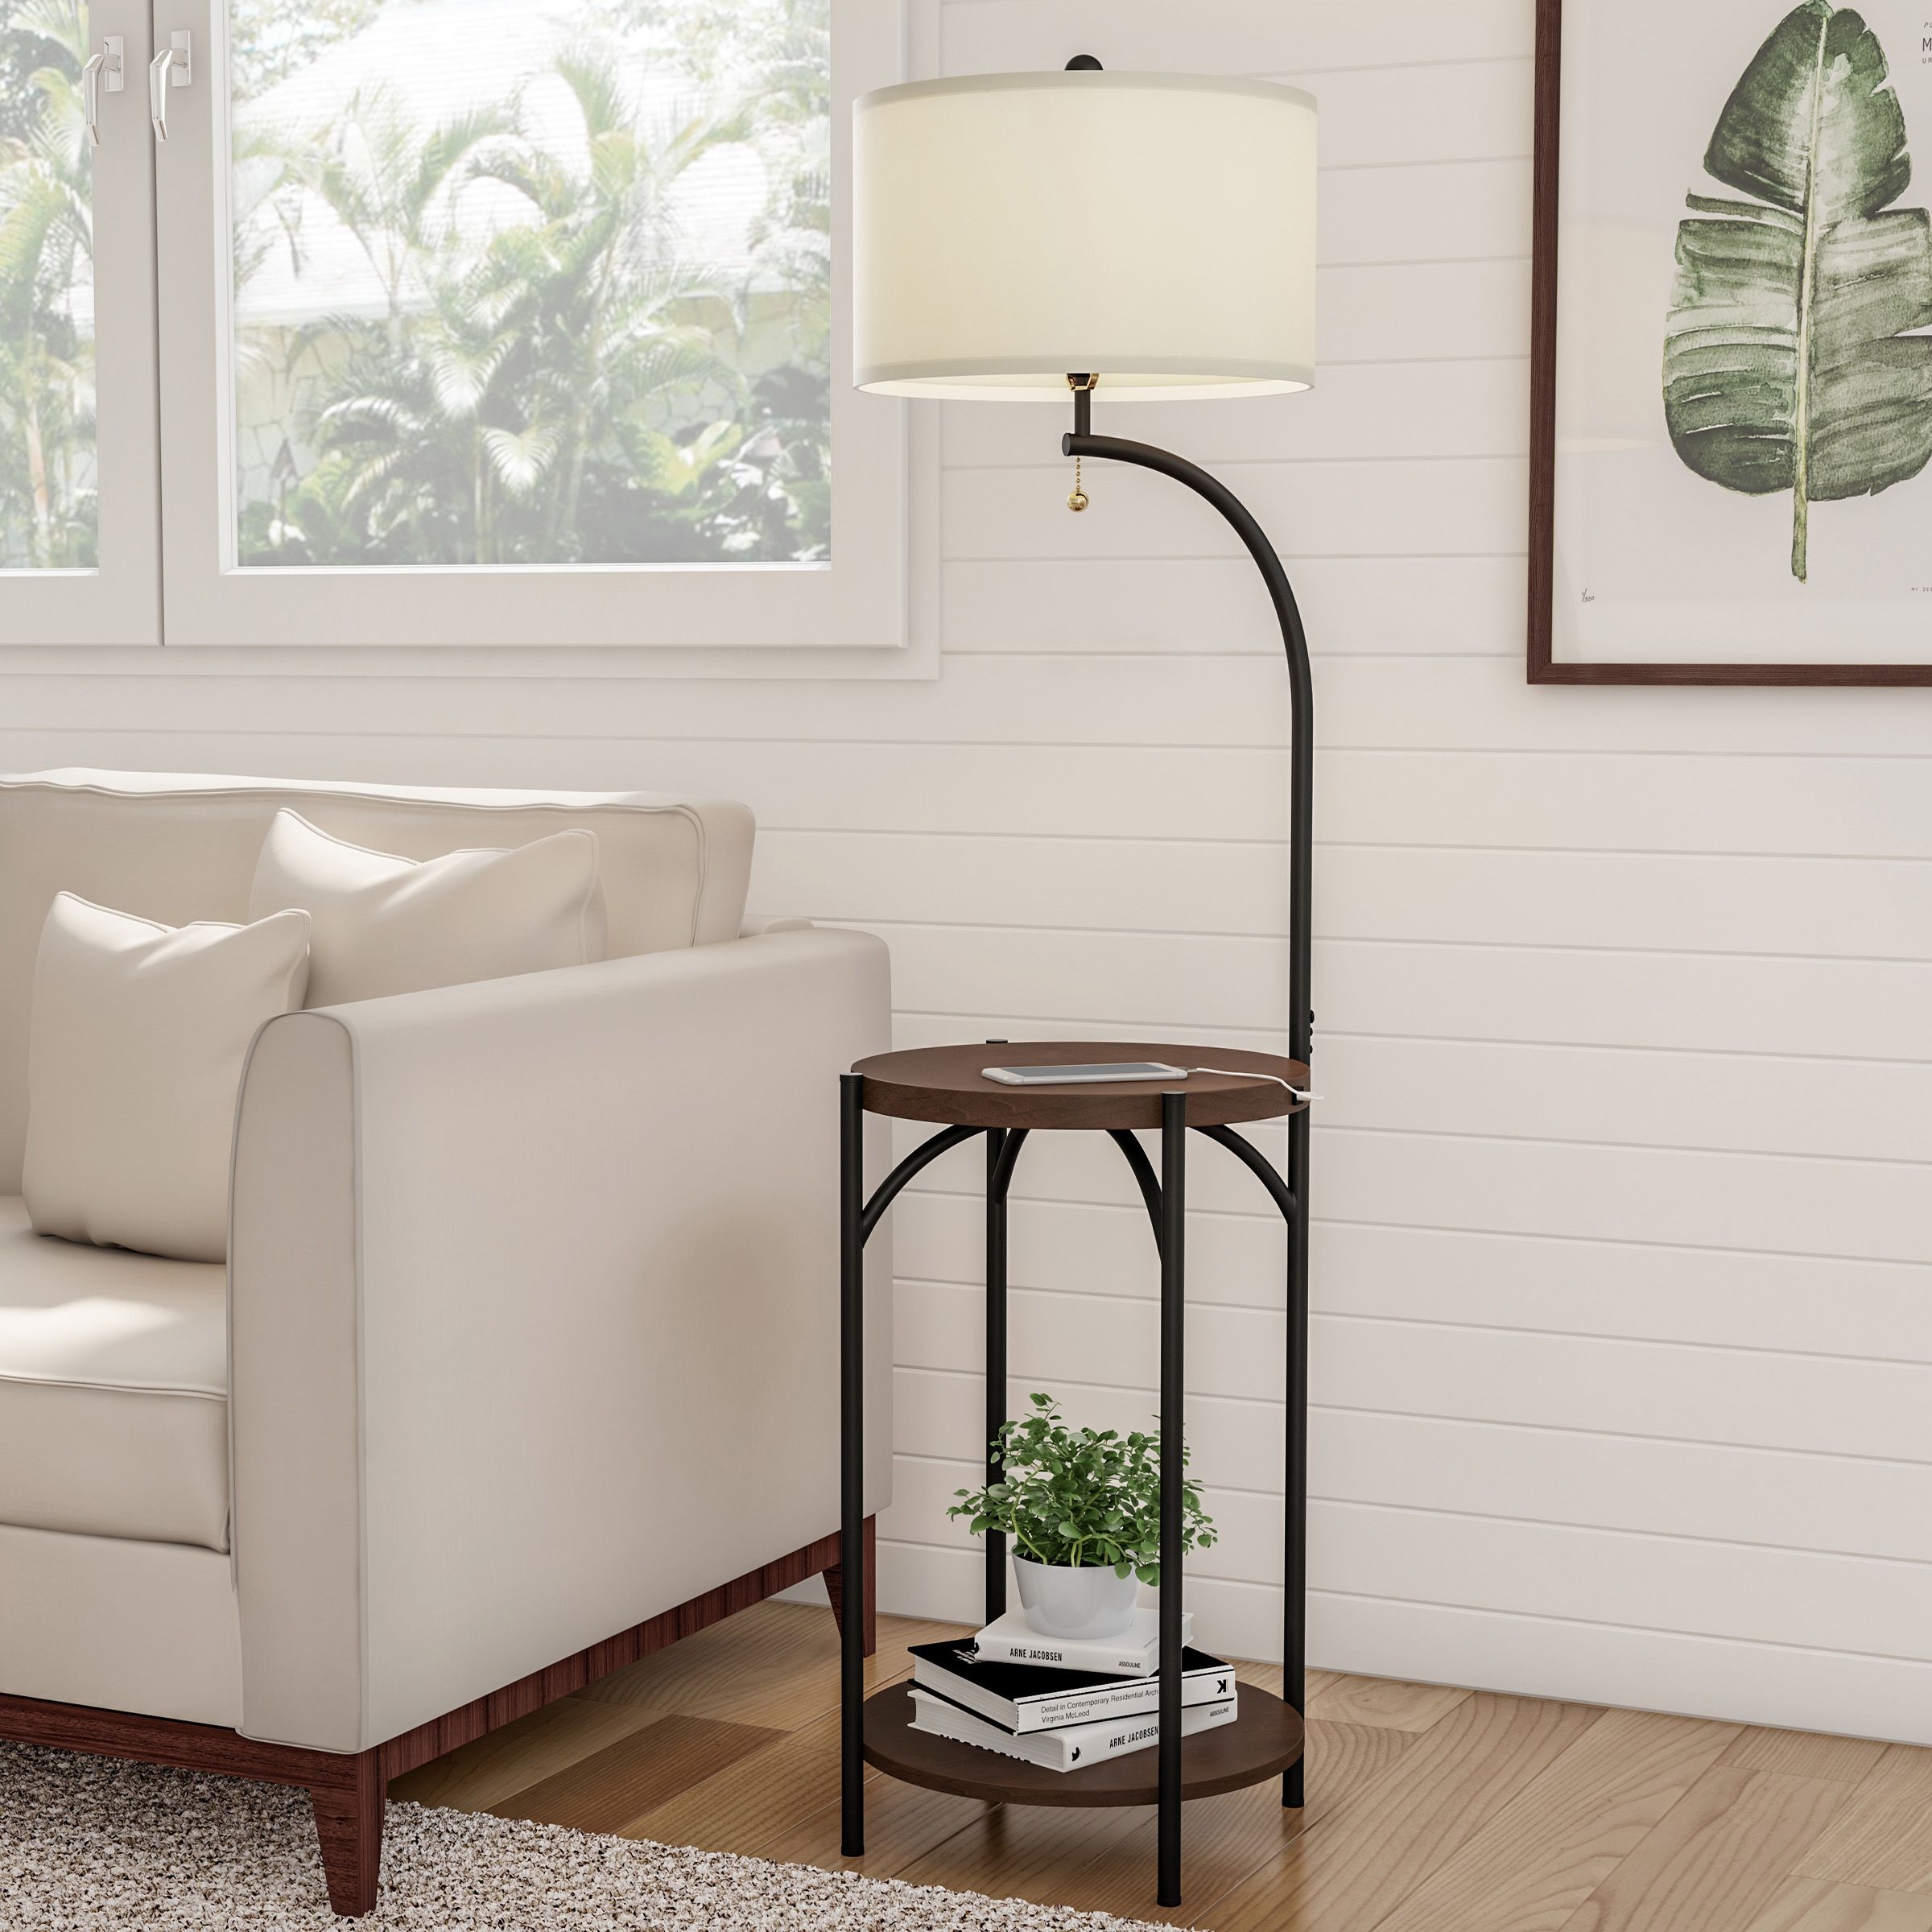 Floor Lamp With Table – Modern Rustic Side Table With Usb Charging Port,  Led Bulb, And Drum Shaped Shade. Standing Light With Shelveslavish Home  – Walmart Inside Floor Lamps With Usb Charge (Photo 8 of 15)